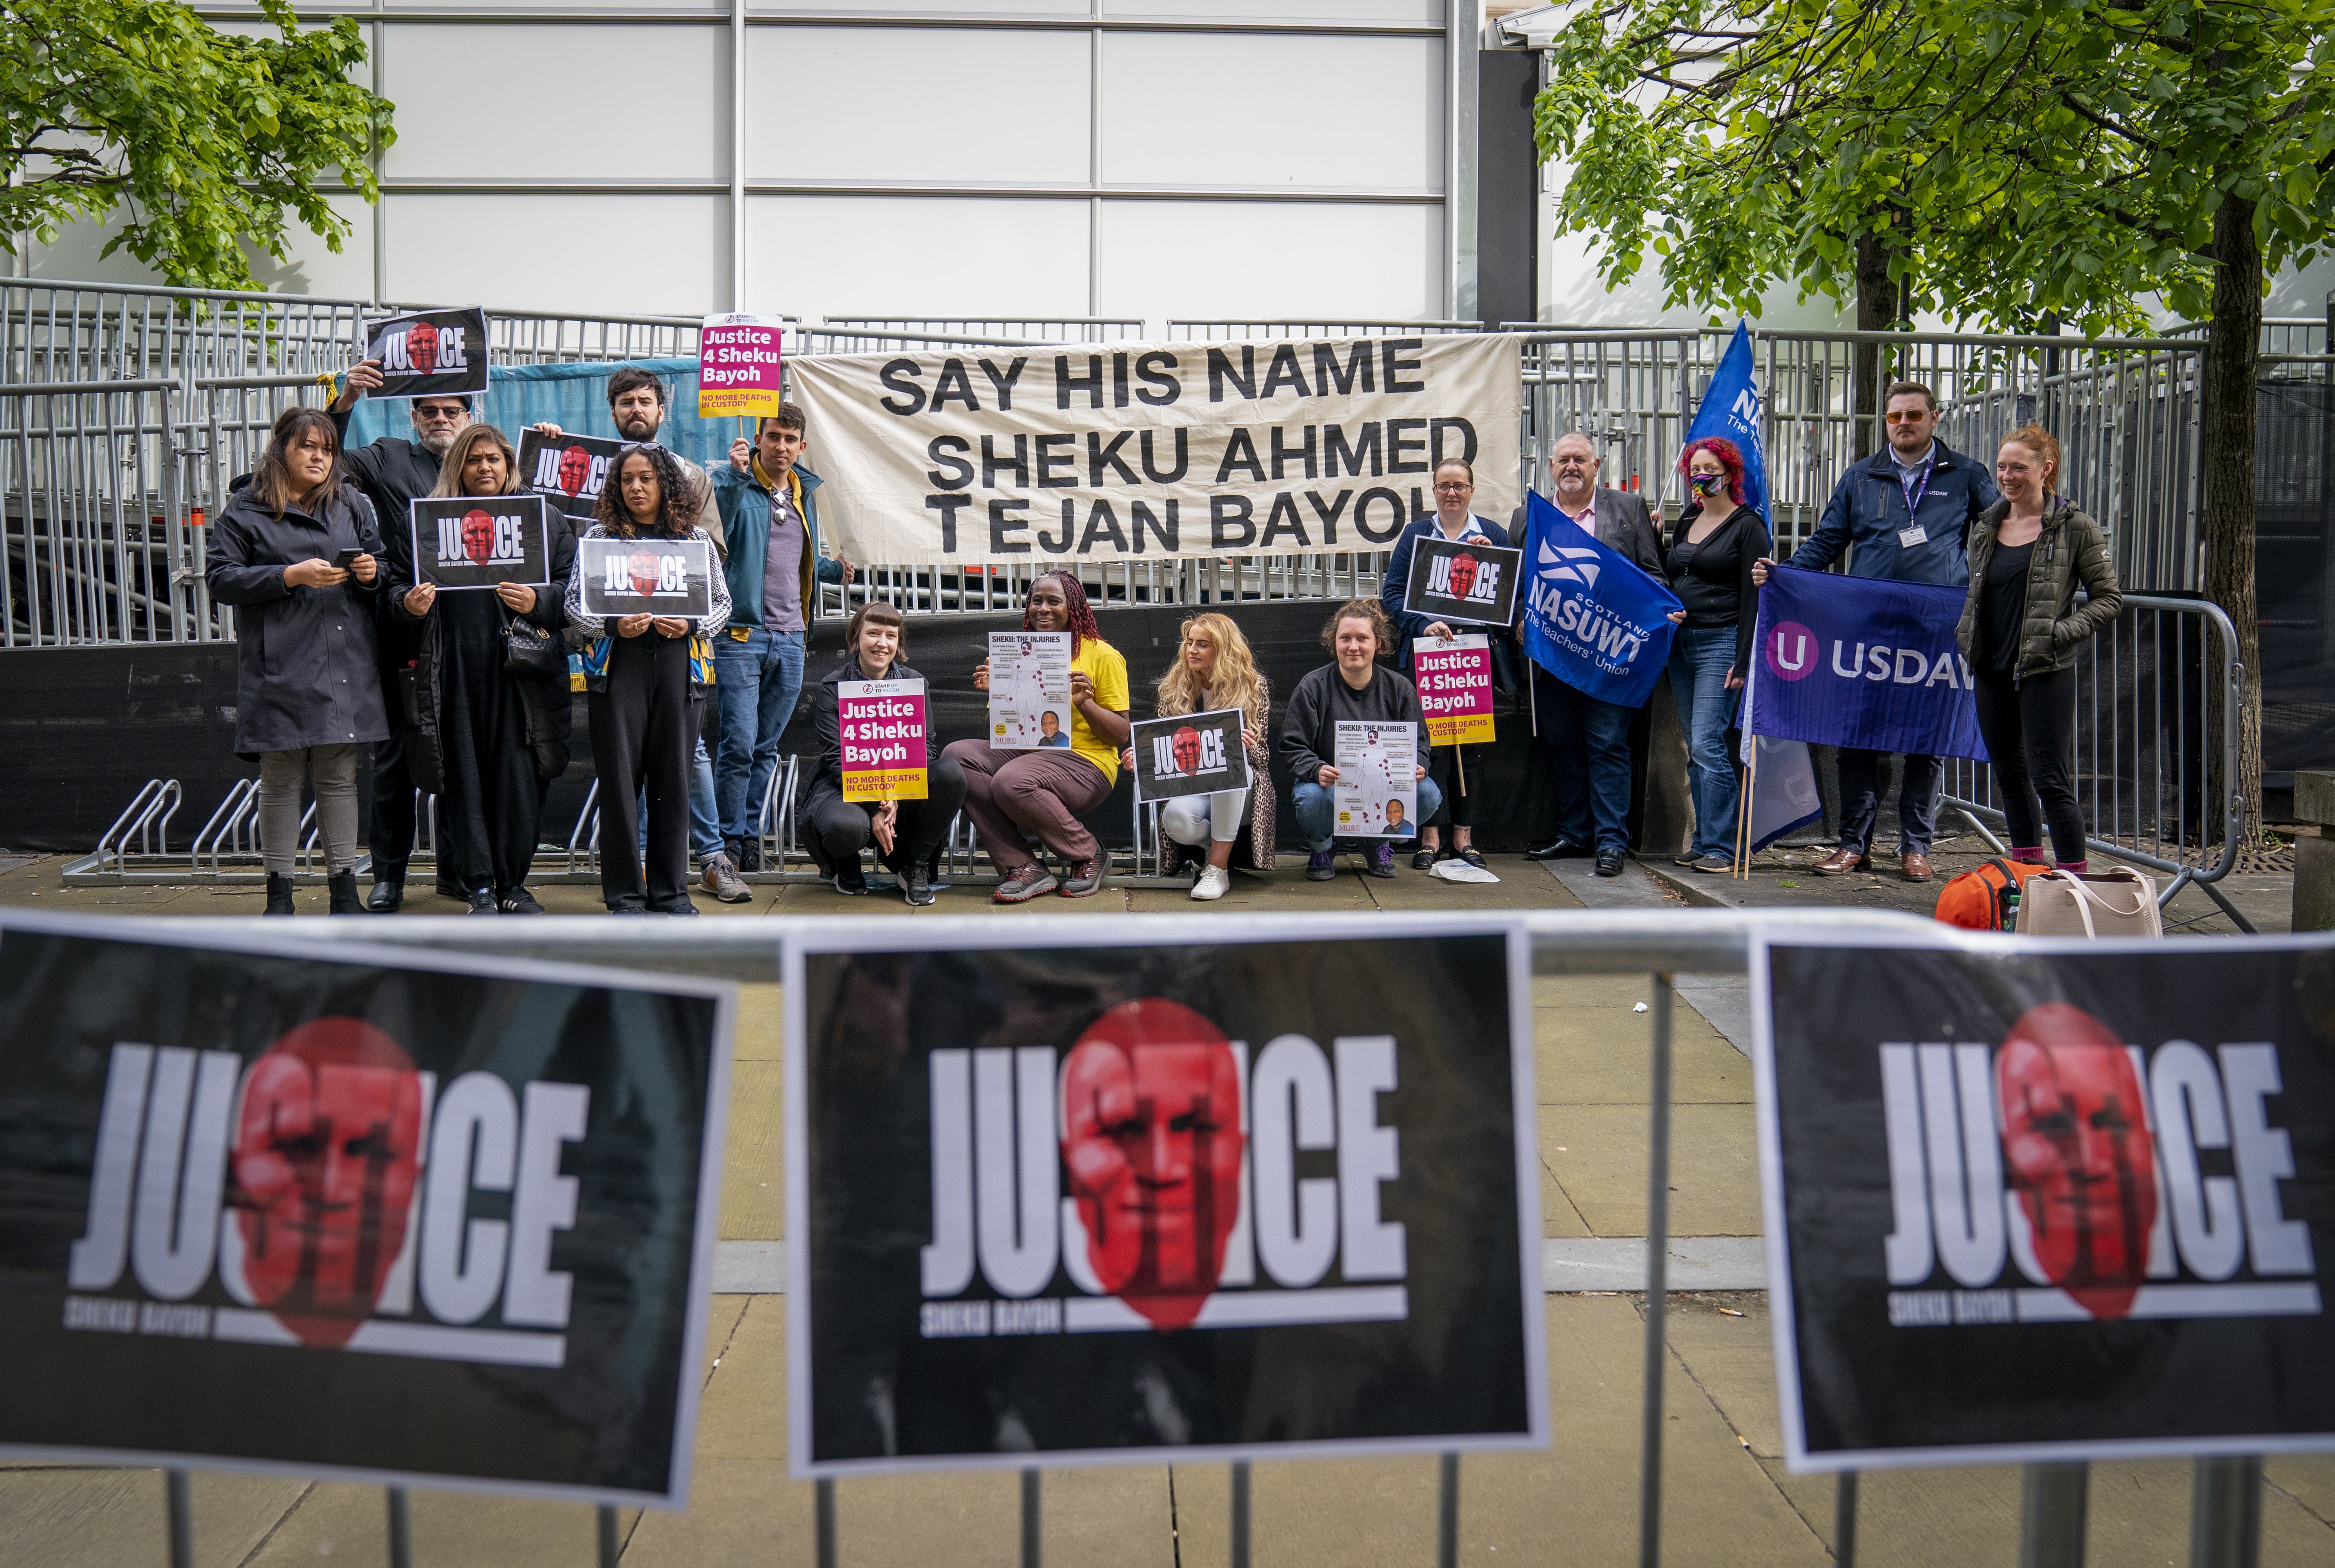 Supporters of the Bayoh family gather outside the inquiry in Edinburgh (Jane Barlow/PA)